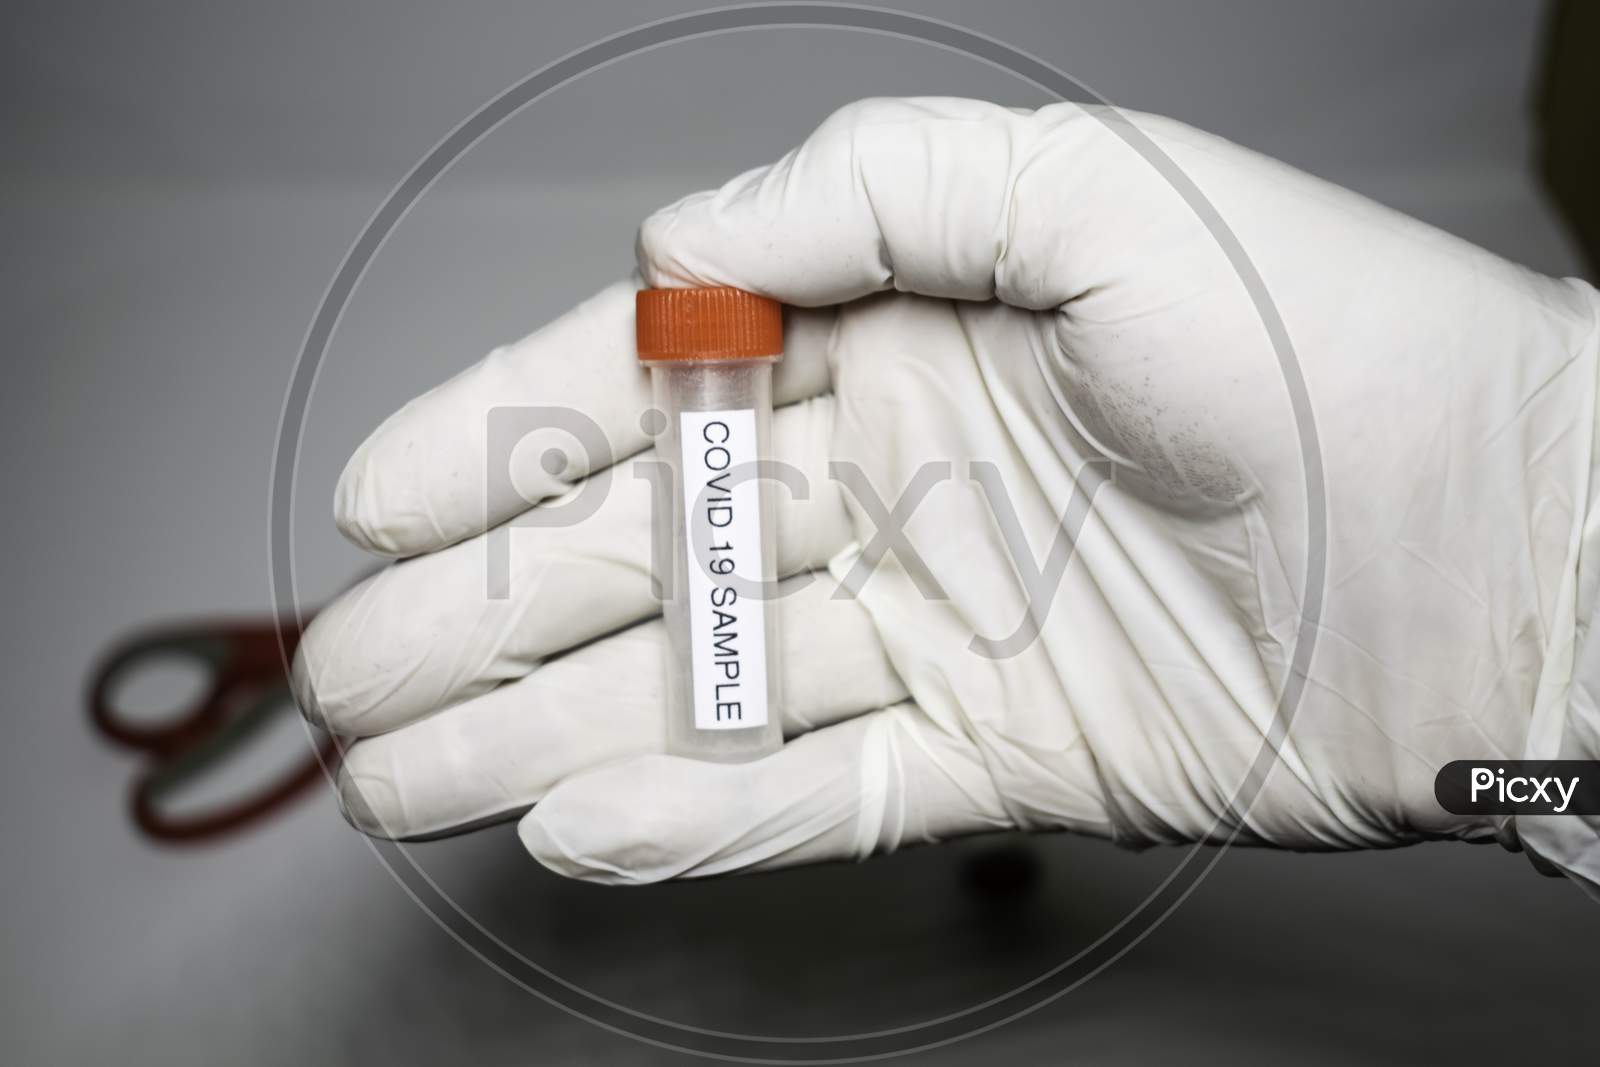 Microbiologist With A Tube Of Biological Sample Contaminated By Coronavirus With Label Covid-19 / Doctor In The Laboratory With A Biological Tube For Analysis And Sampling Of Covid-19 Infectious Diseas